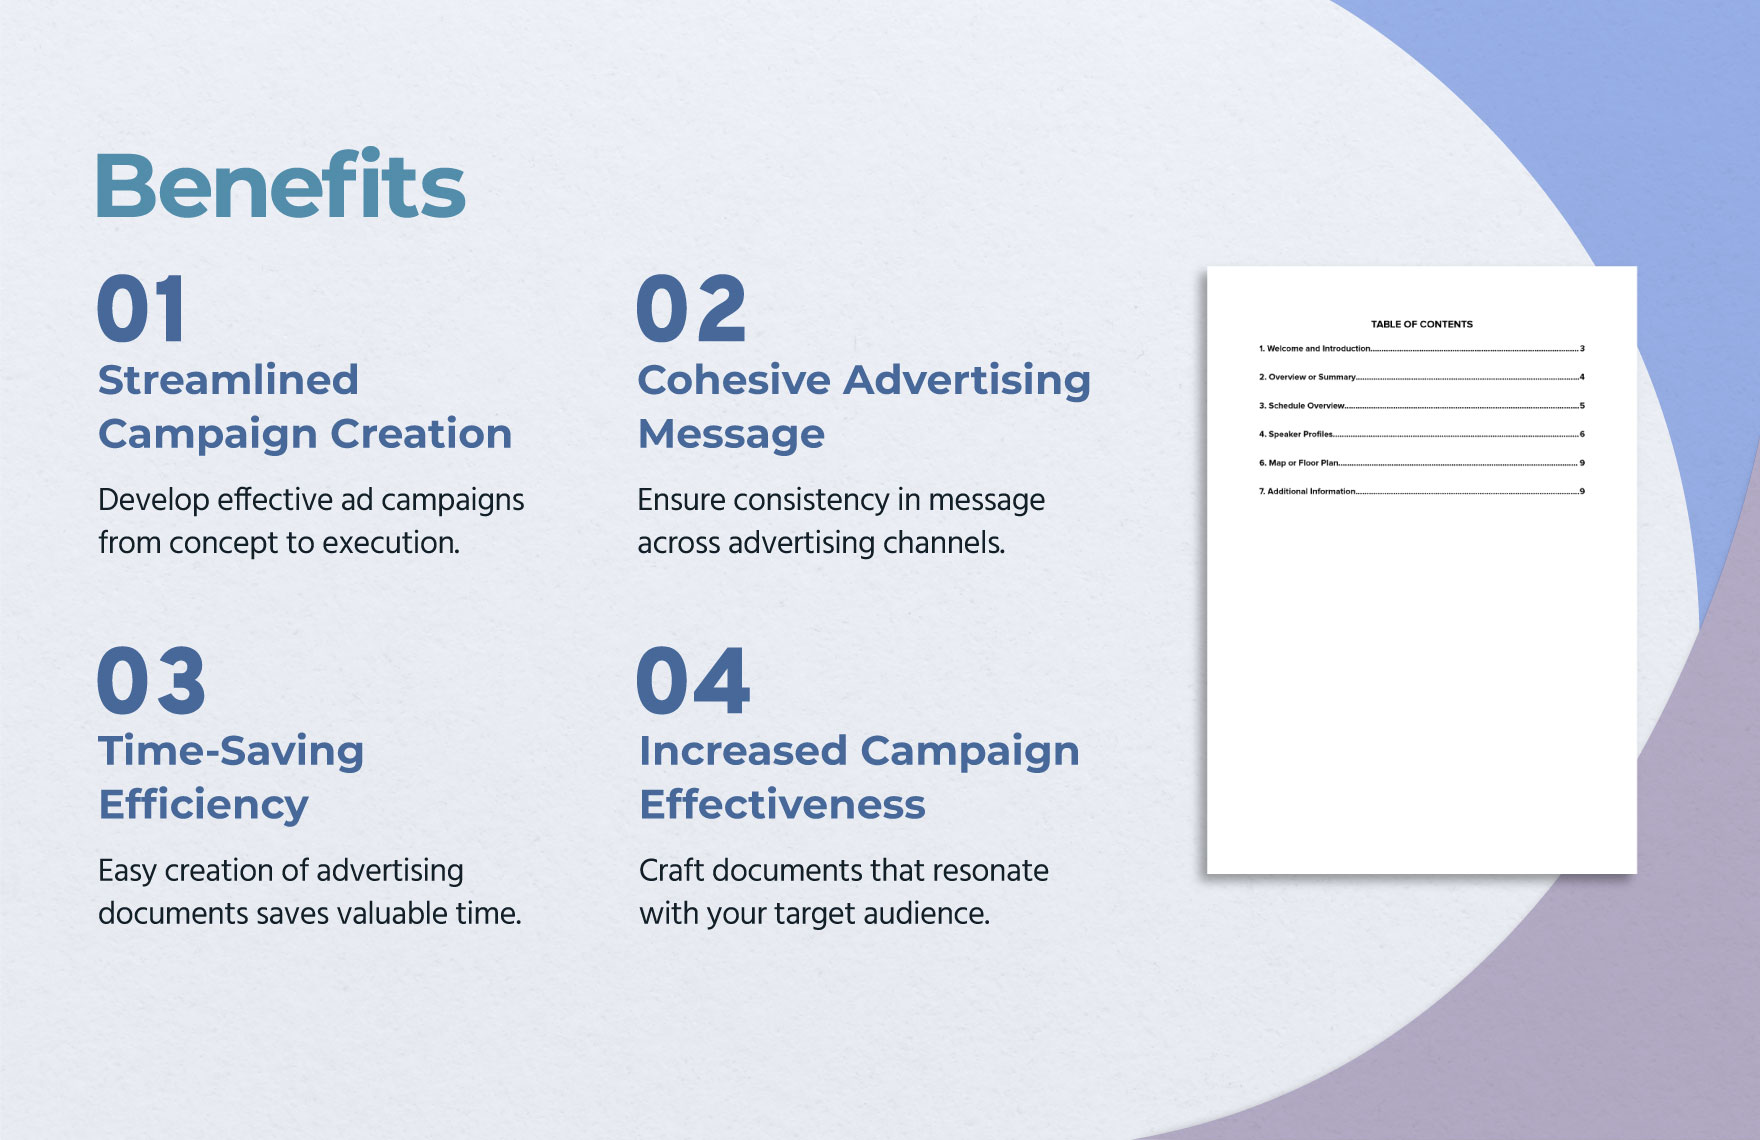 Multi-Day Conference Agenda in Advertising Template